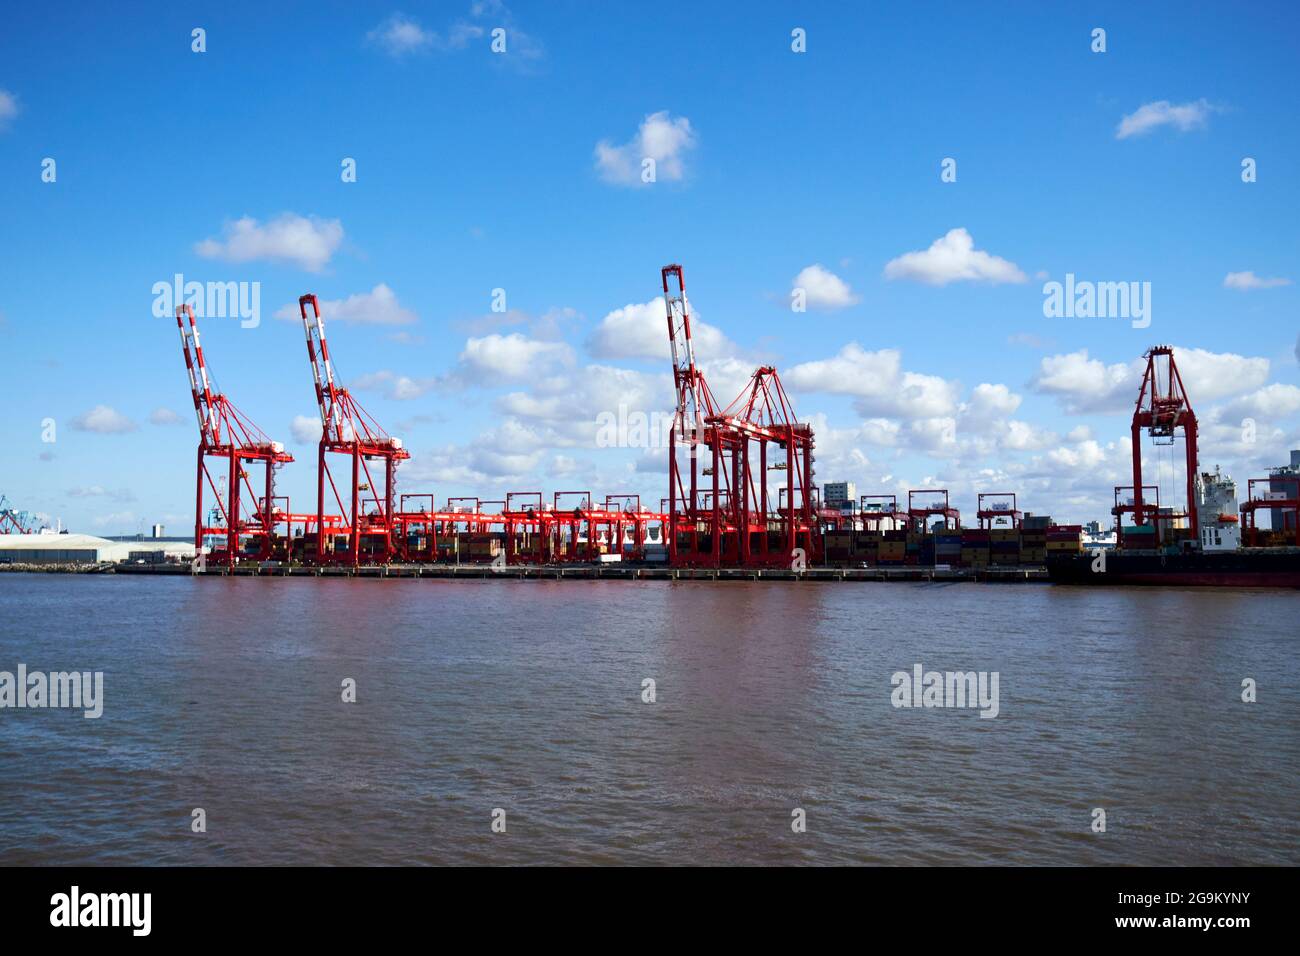 cranes at liverpool 2 container terminal freeport liverpool england uk Stock Photo